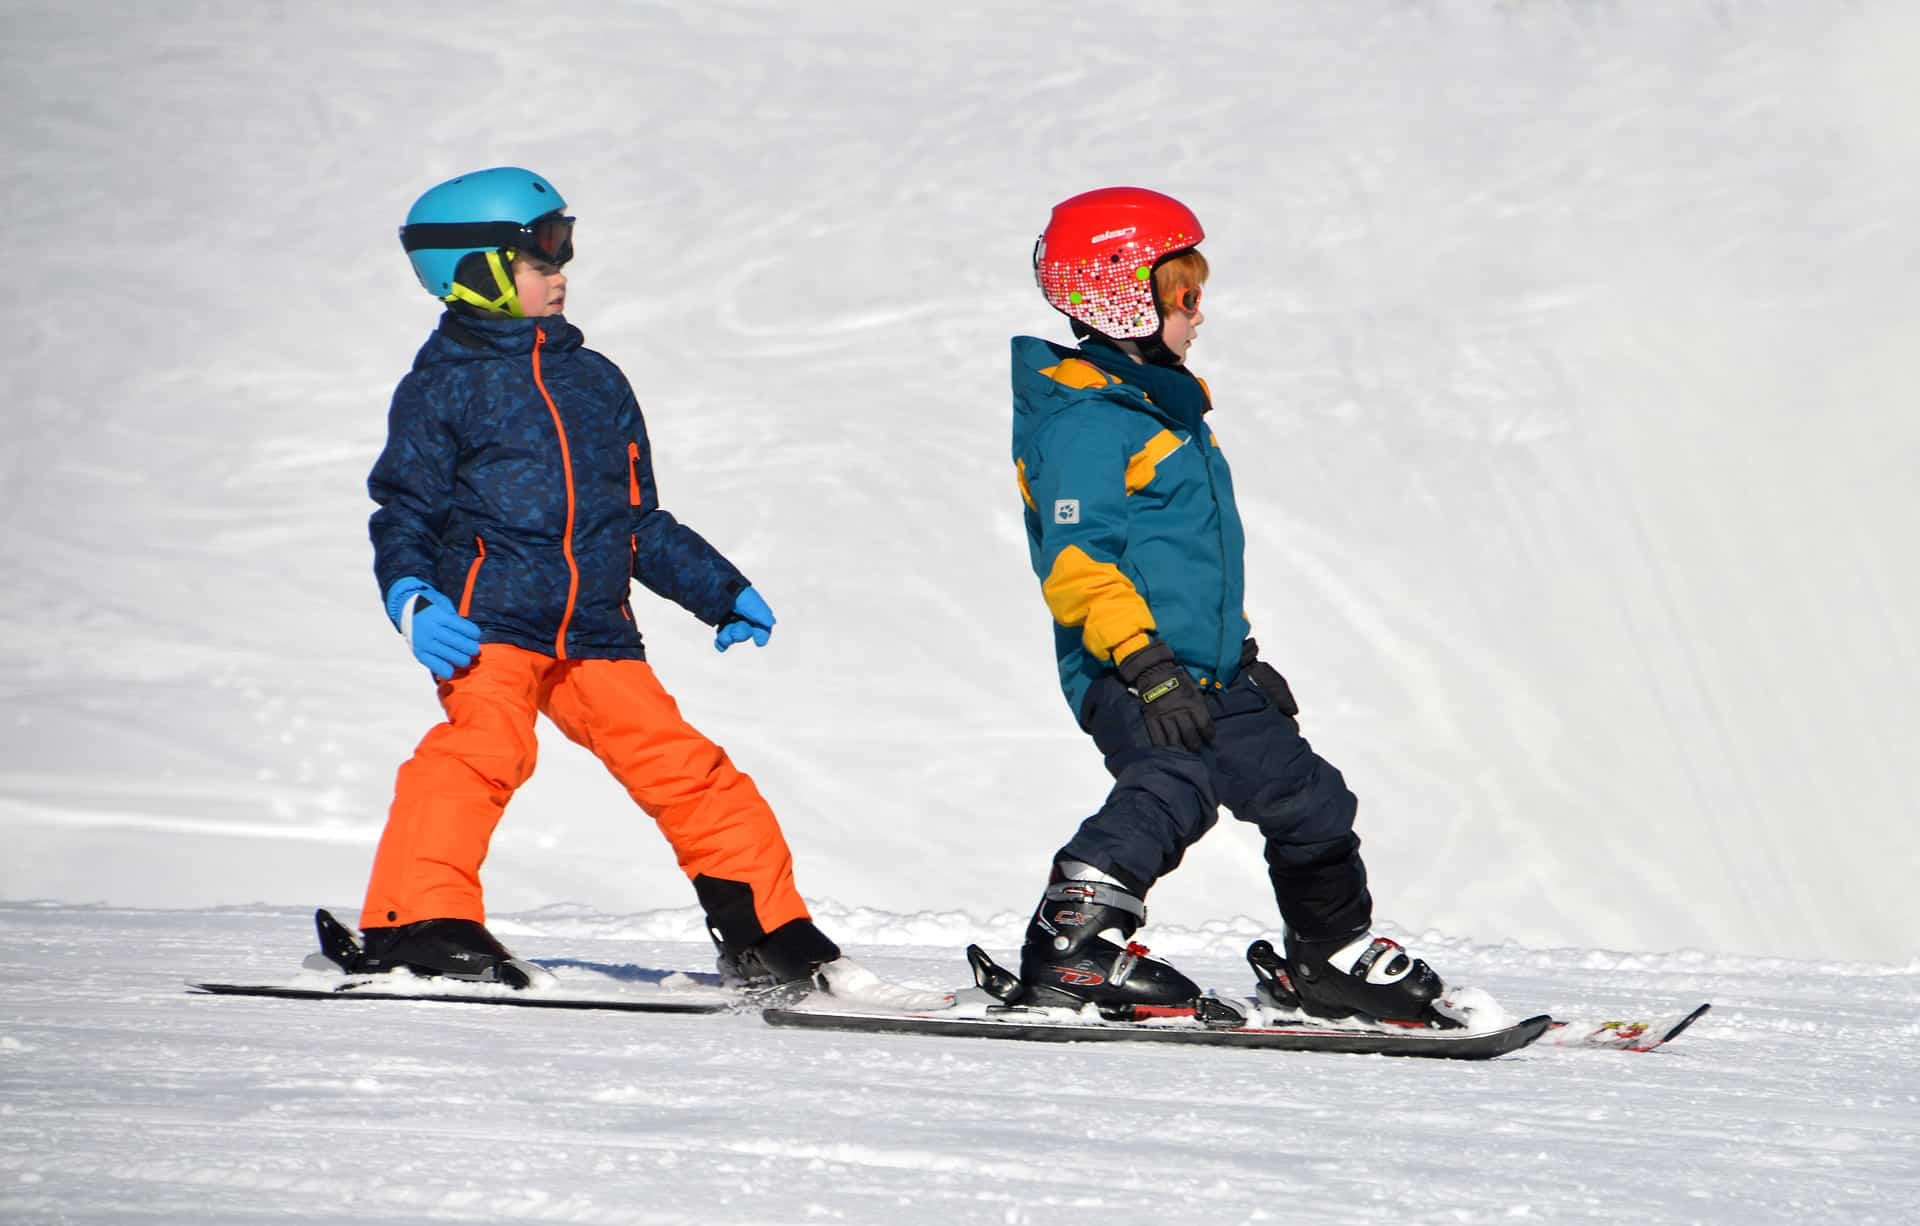 The best places to learn skiing for young skiers